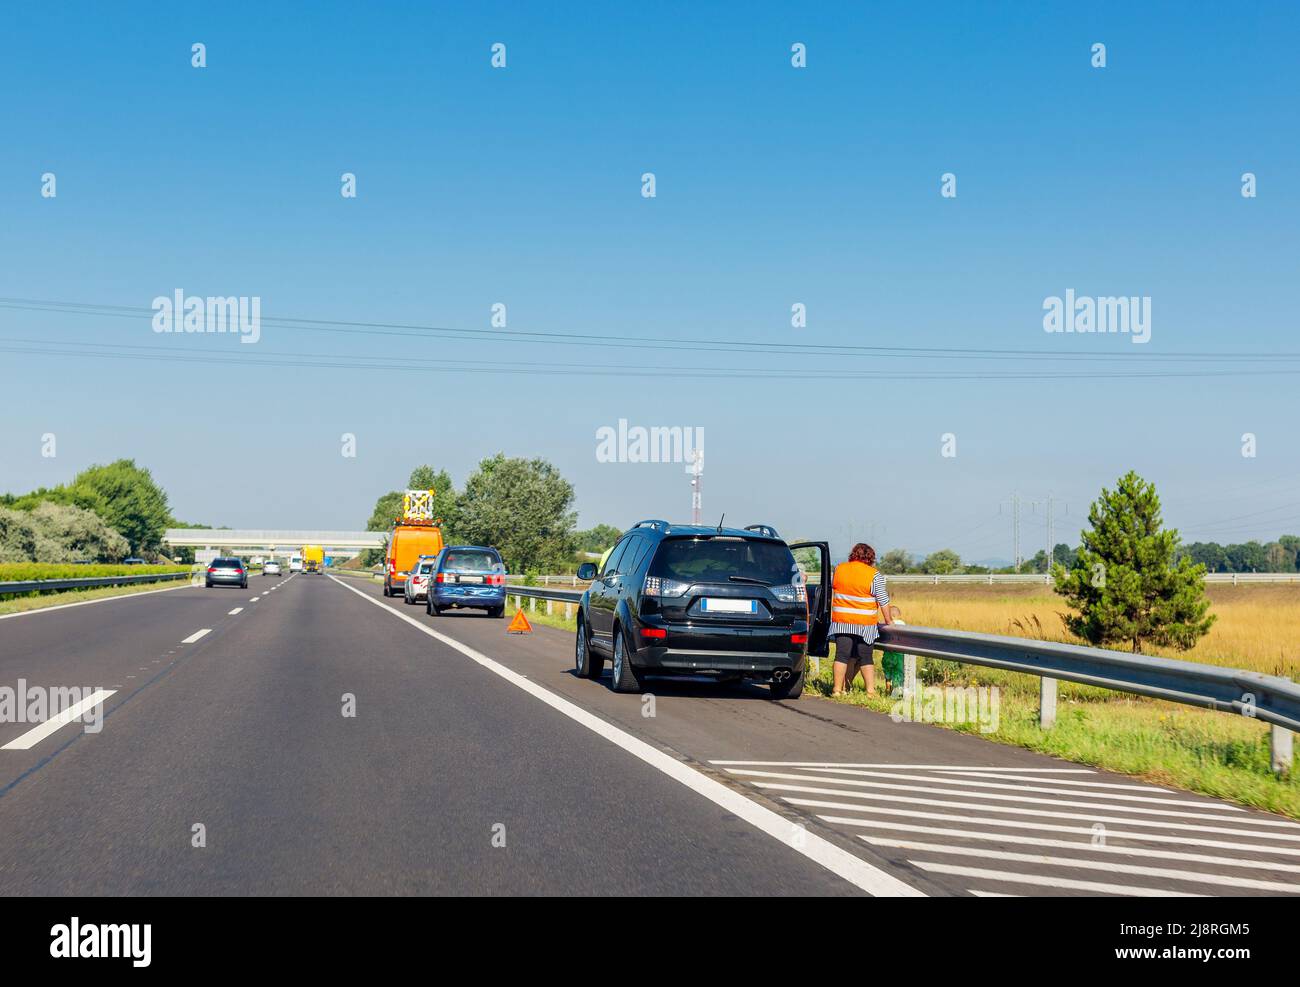 Two cars after collision on emergency stopping lane on roadside Stock Photo